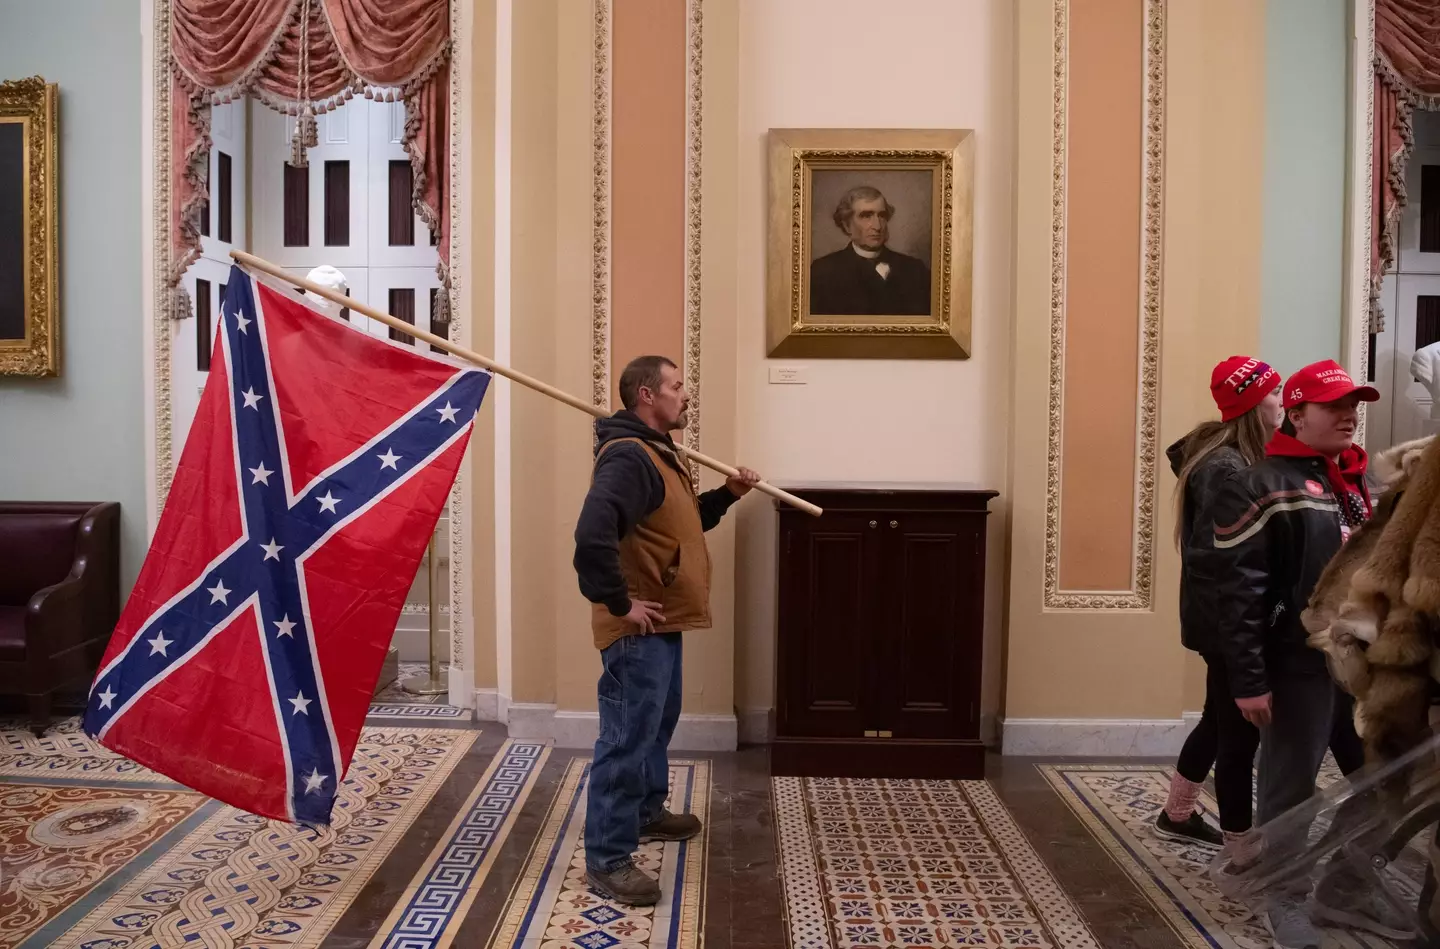 The Confederate battle flag is flown inside the Capitol Building.